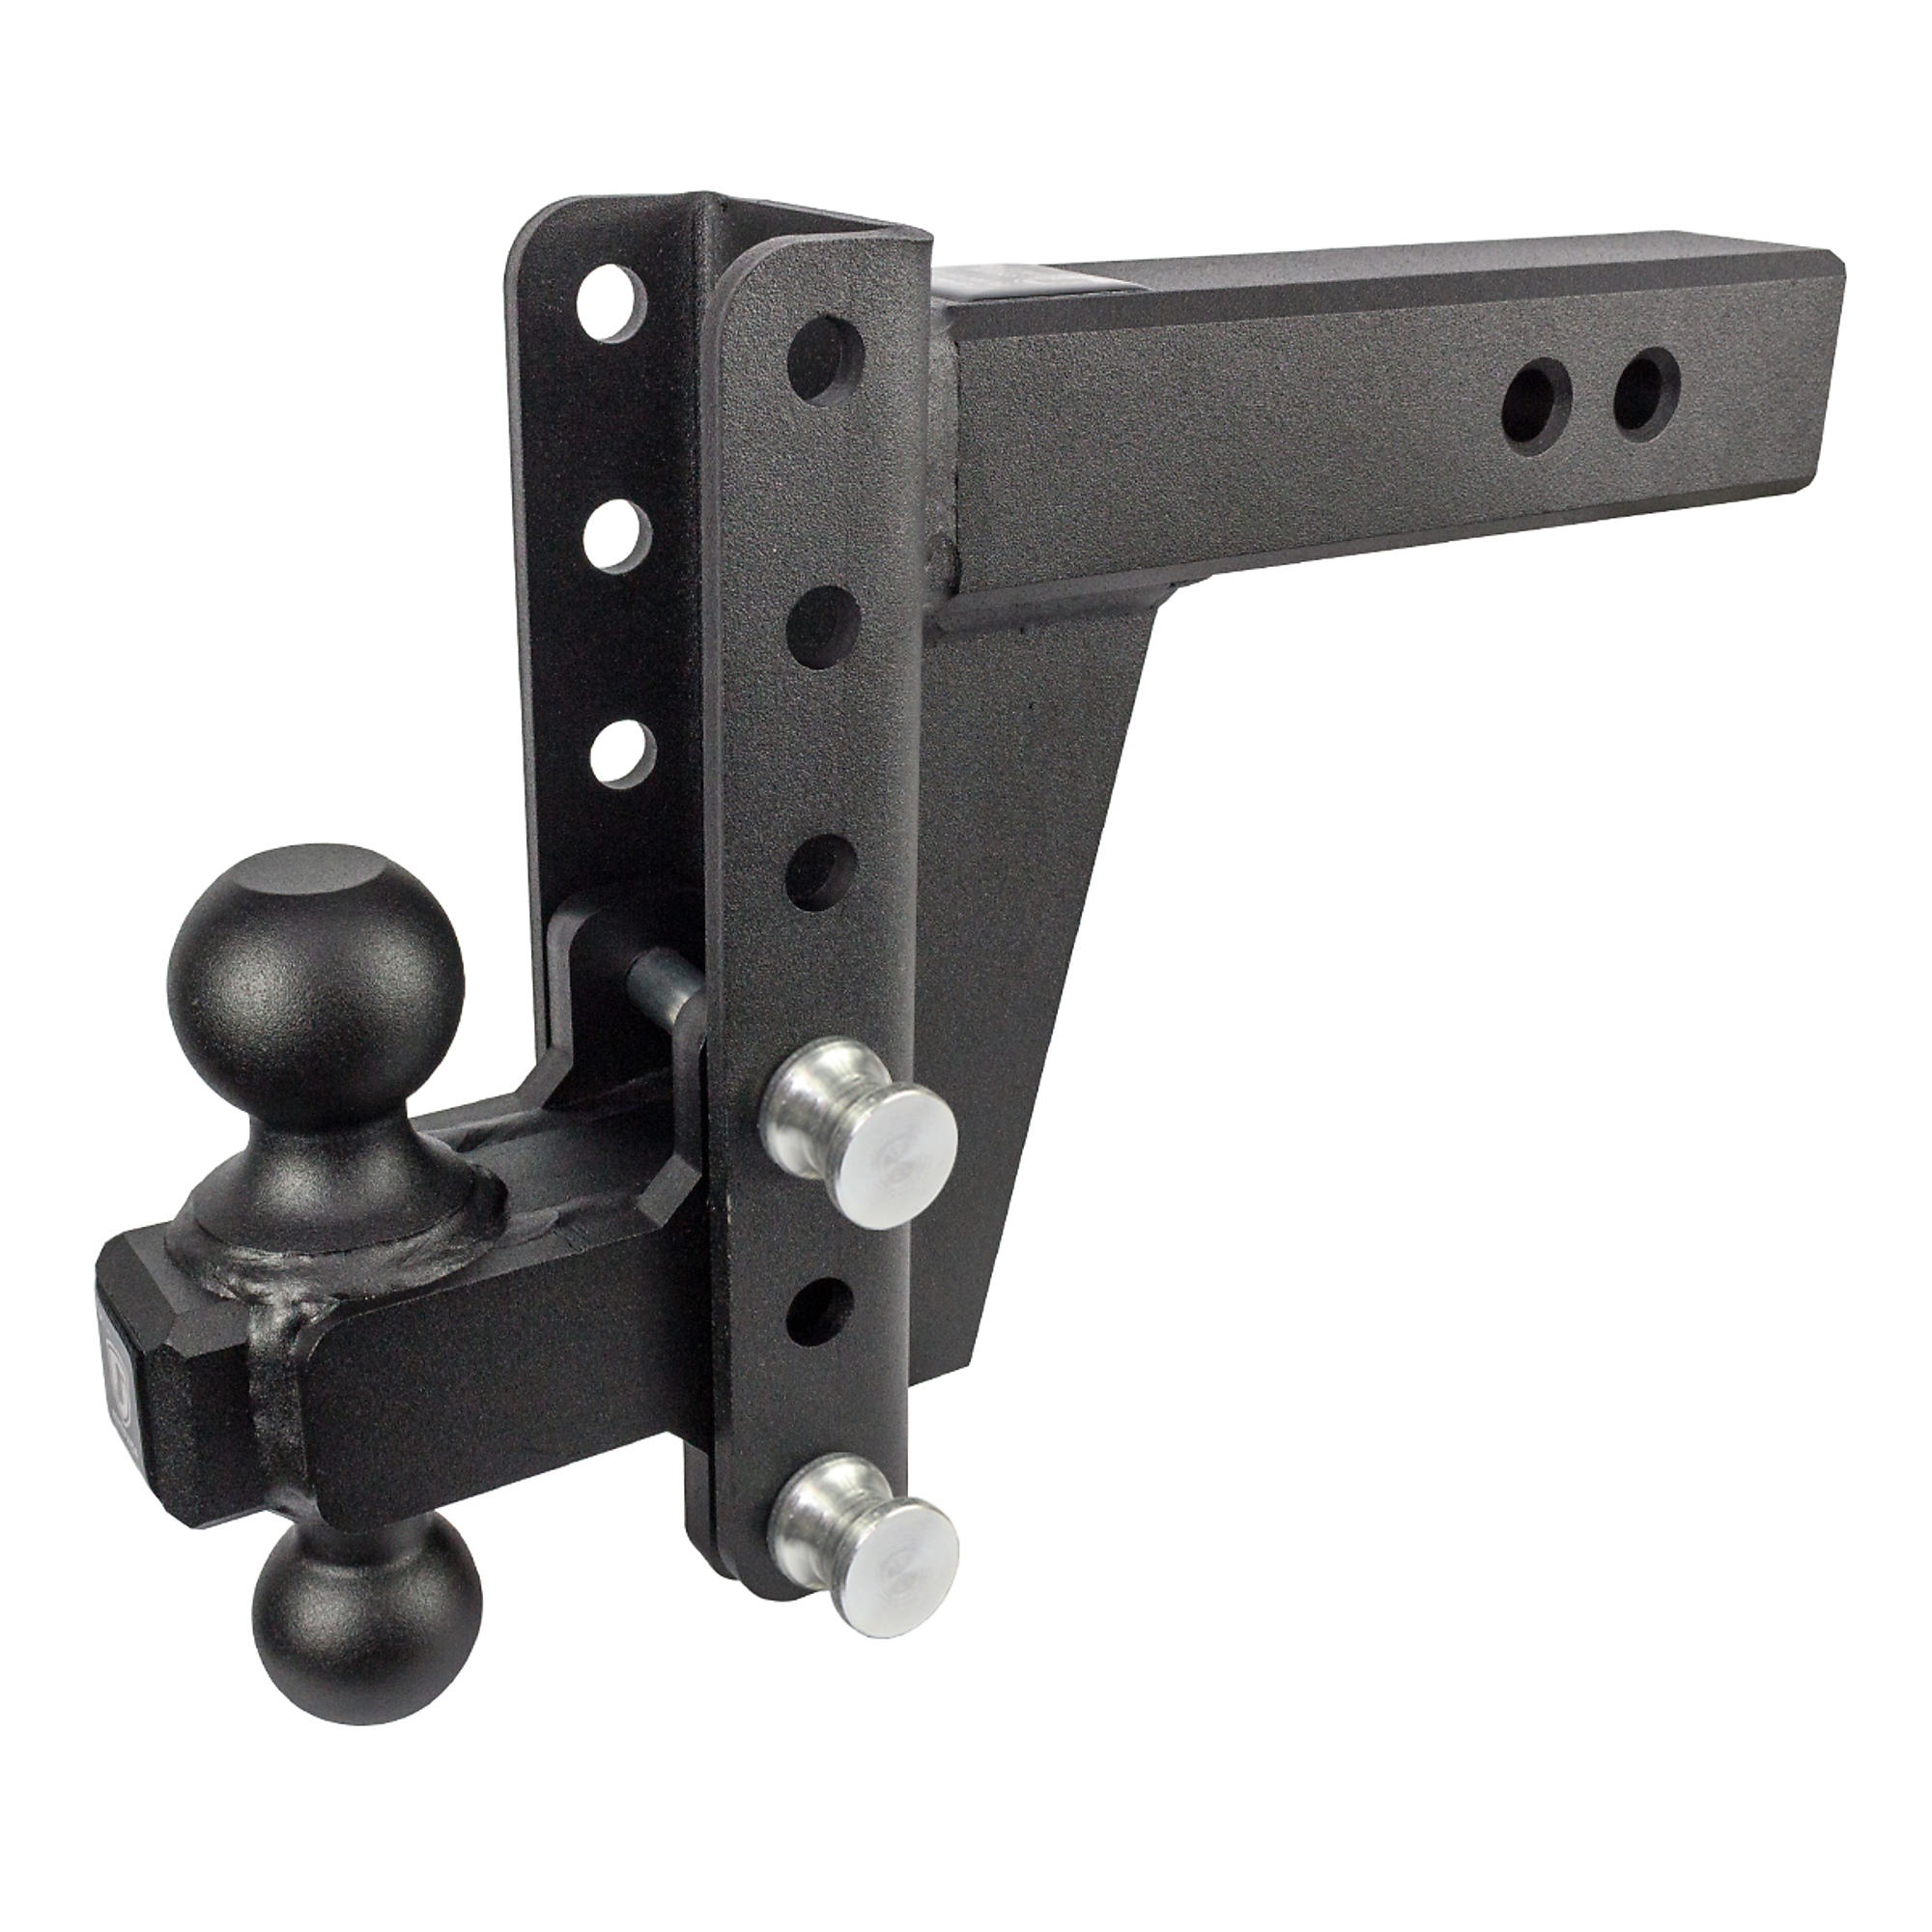 BulletProof Hitches, 2.5Inch EXTREME DUTY 6Inch DROP/RISE HITCH, Model ED256